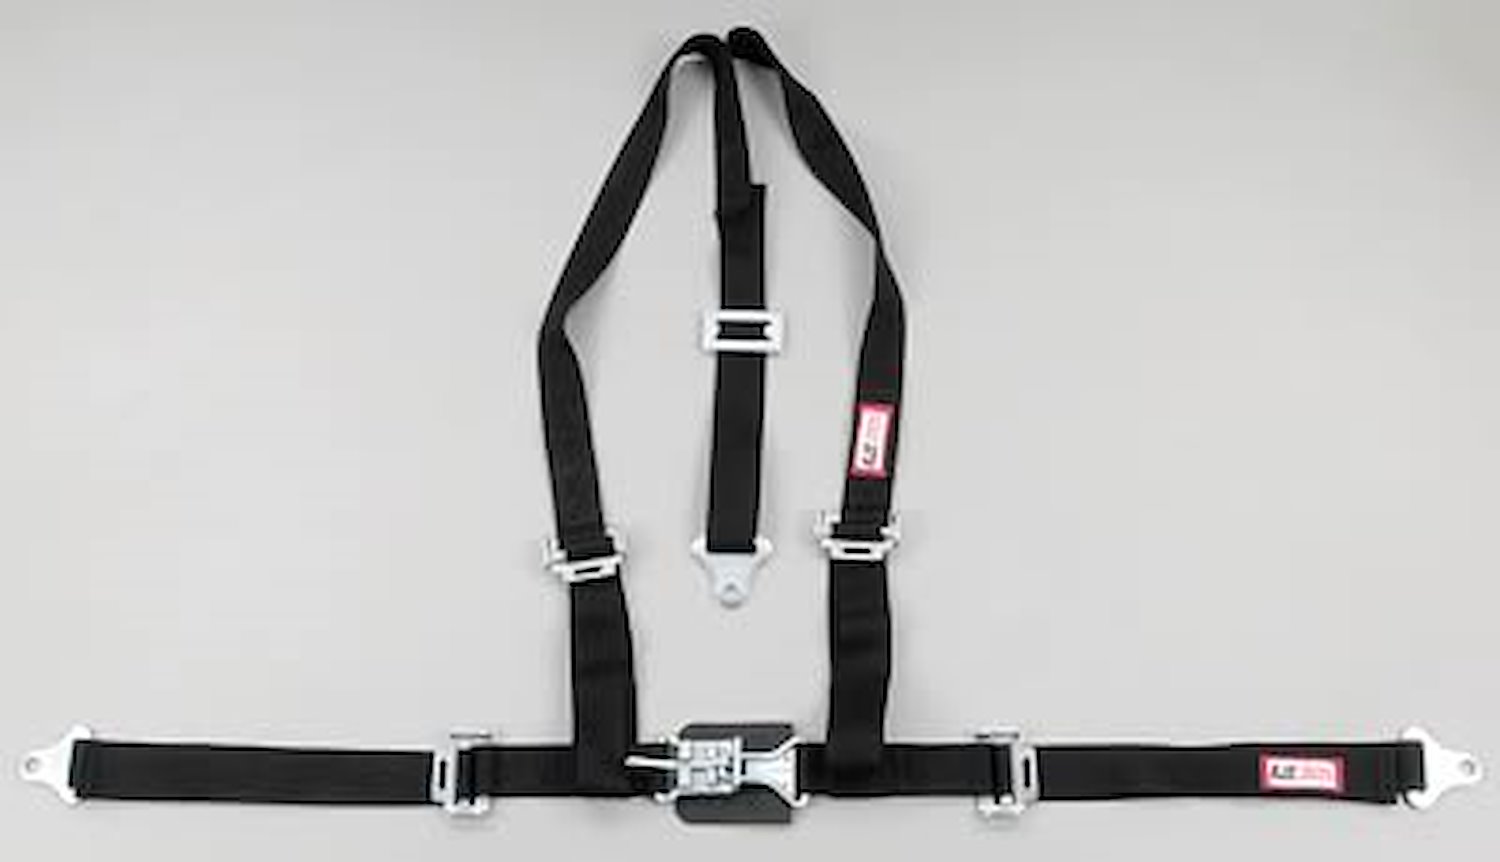 NON-SFI L&L HARNESS 2 PULL UP Lap Belt SEWN IN 2 S.H. INDIVIDUAL FLOOR Mount ALL WRAP ENDS RED